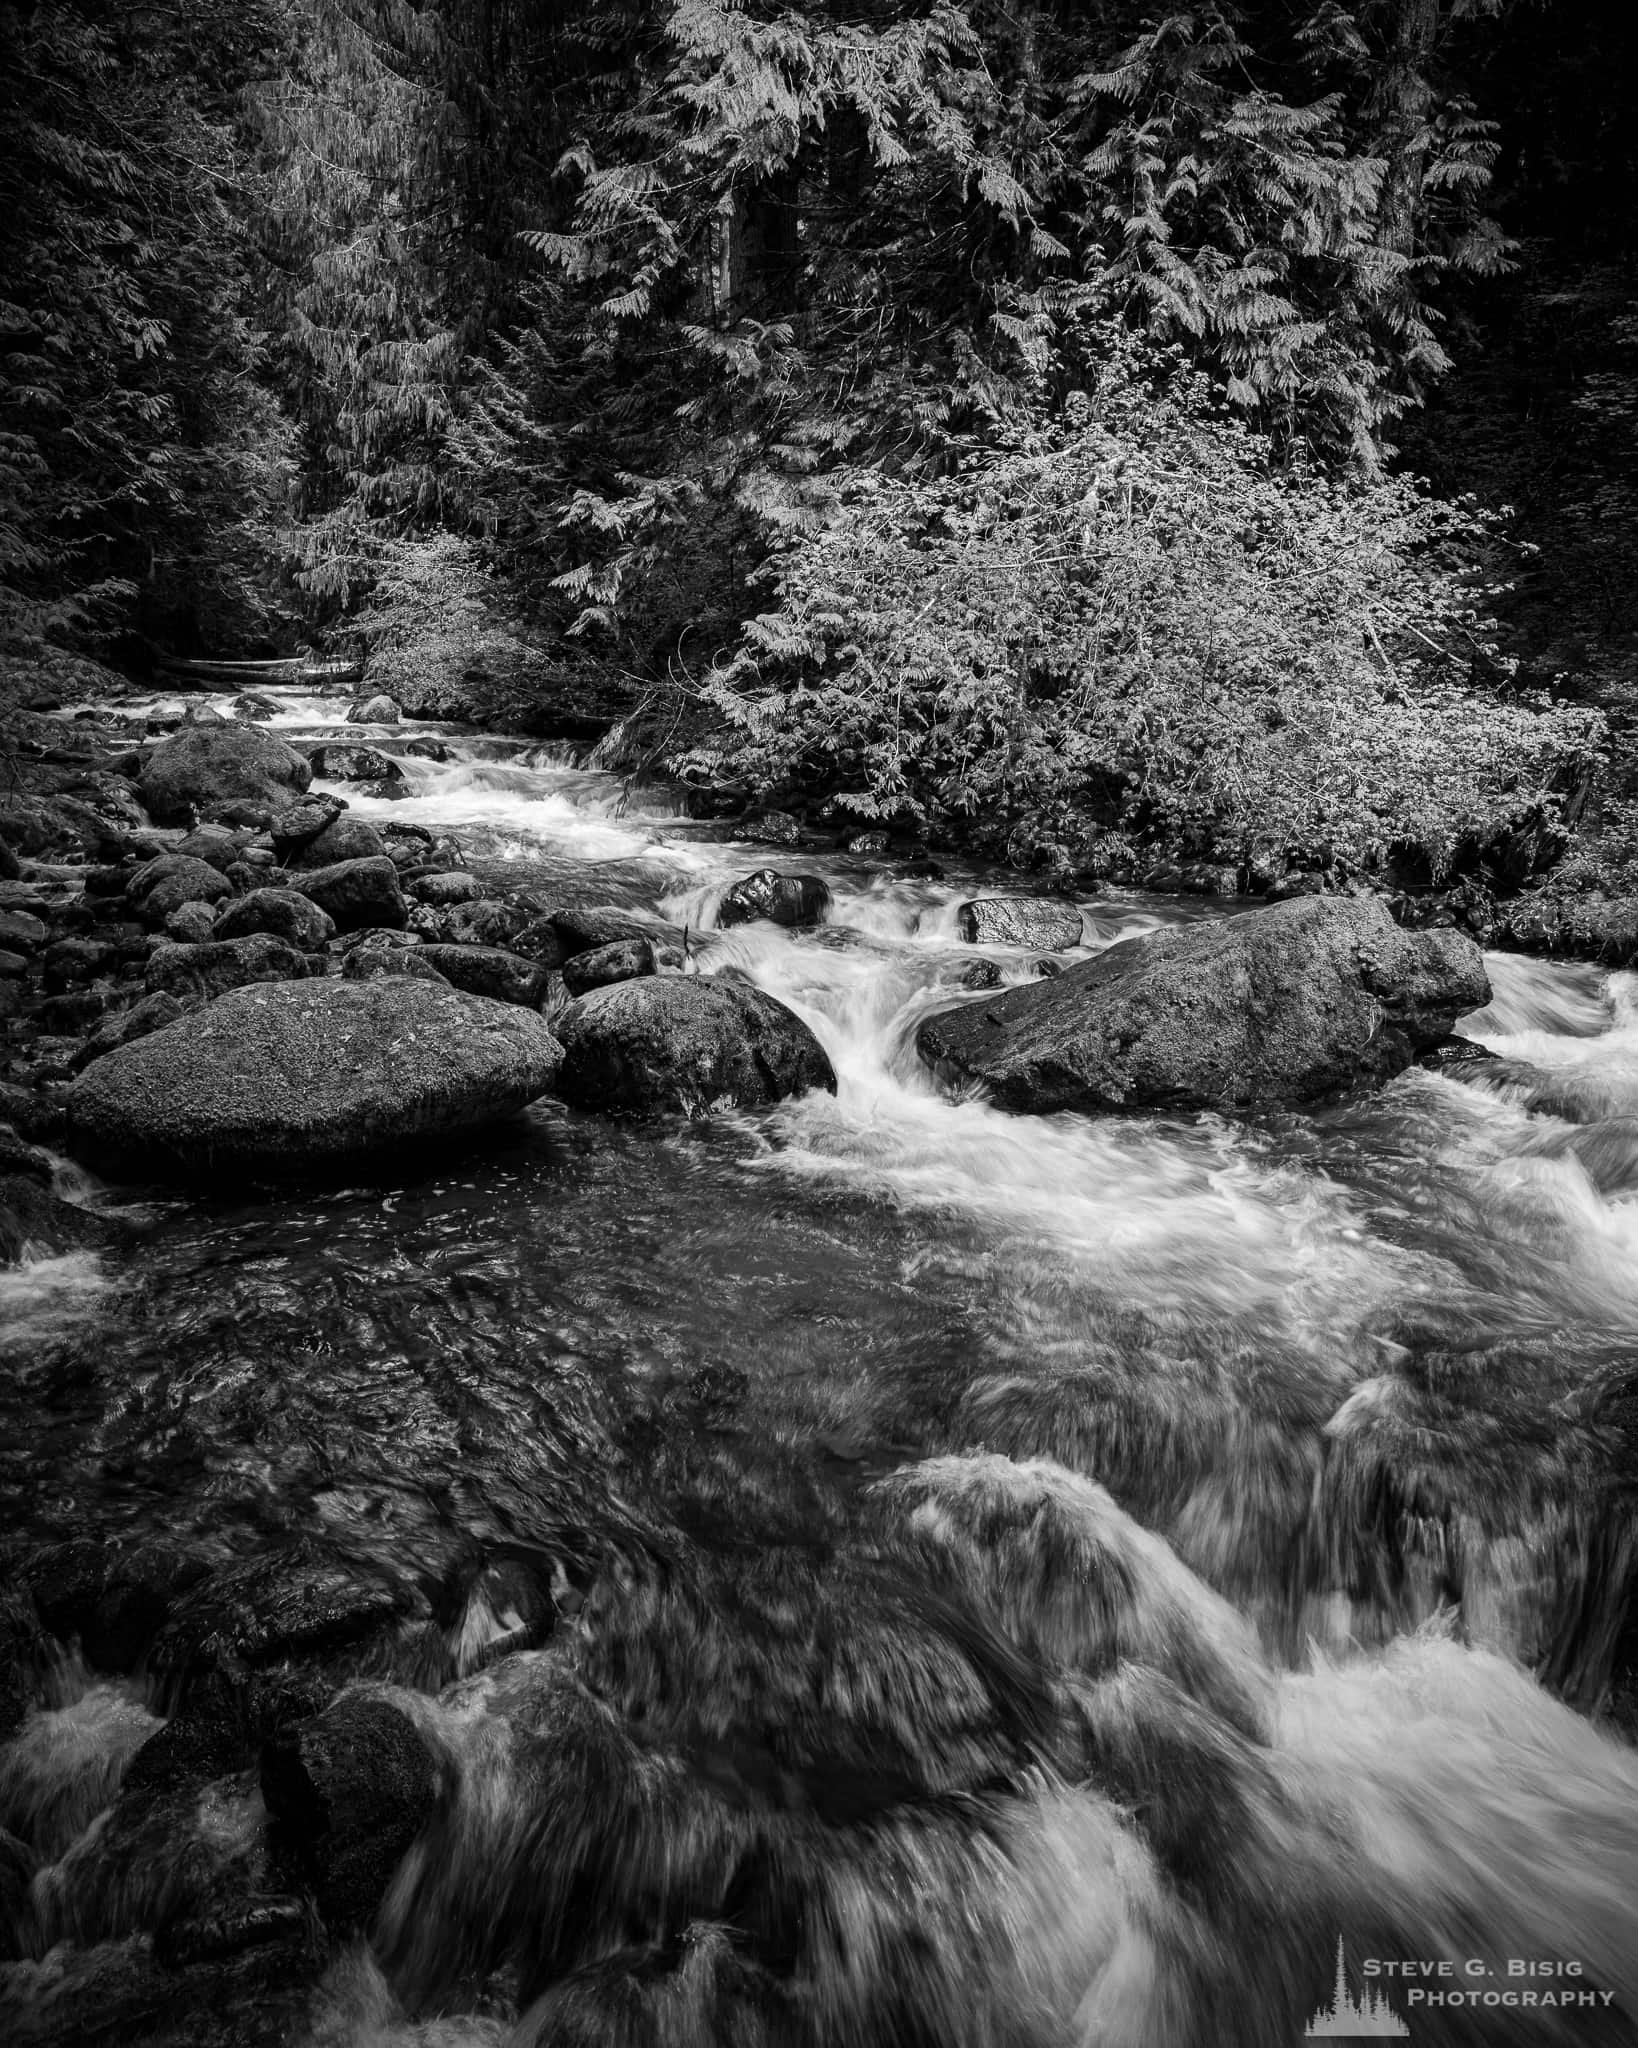 A black and white landscape photograph of a forest stream found along Forest Road 52 (Skate Creek Road) in the Gifford Pinchot National Forest, Washington.